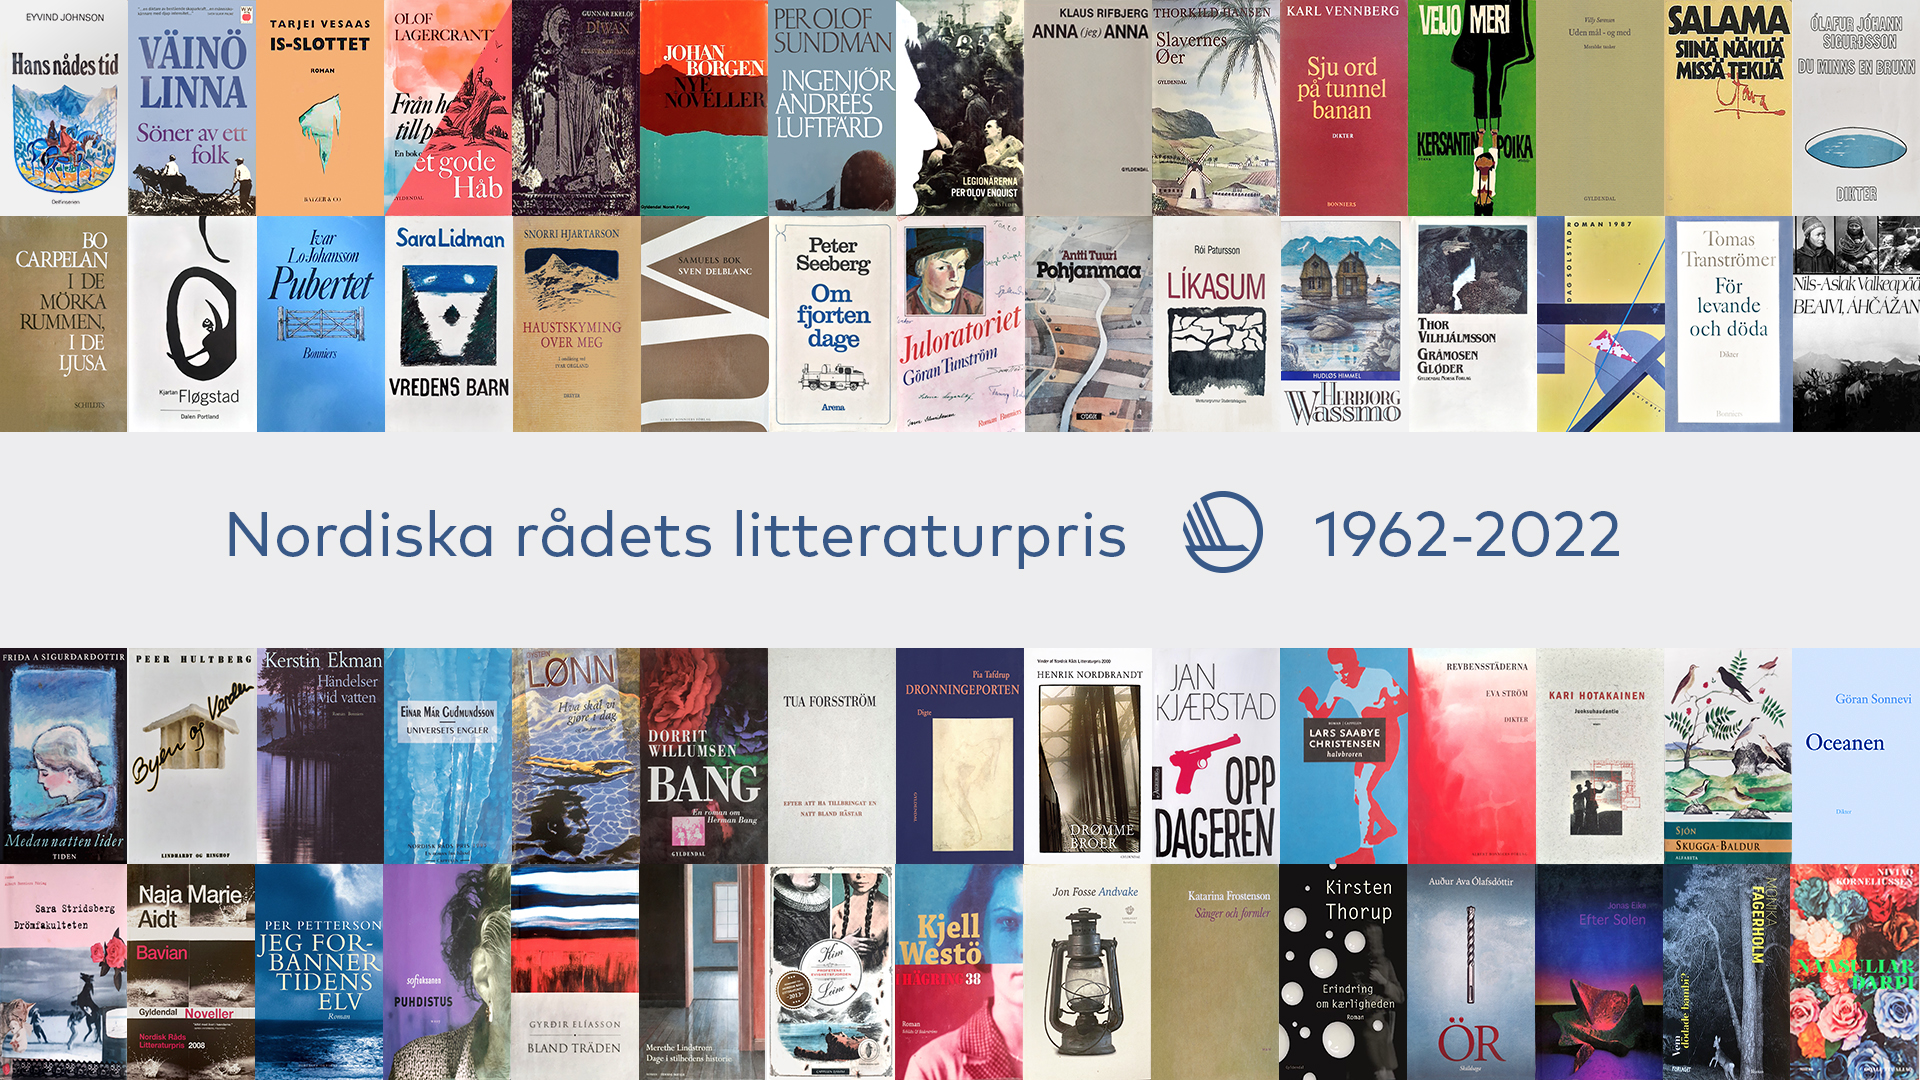 Nordic Council Literature Prize’s 60-year History